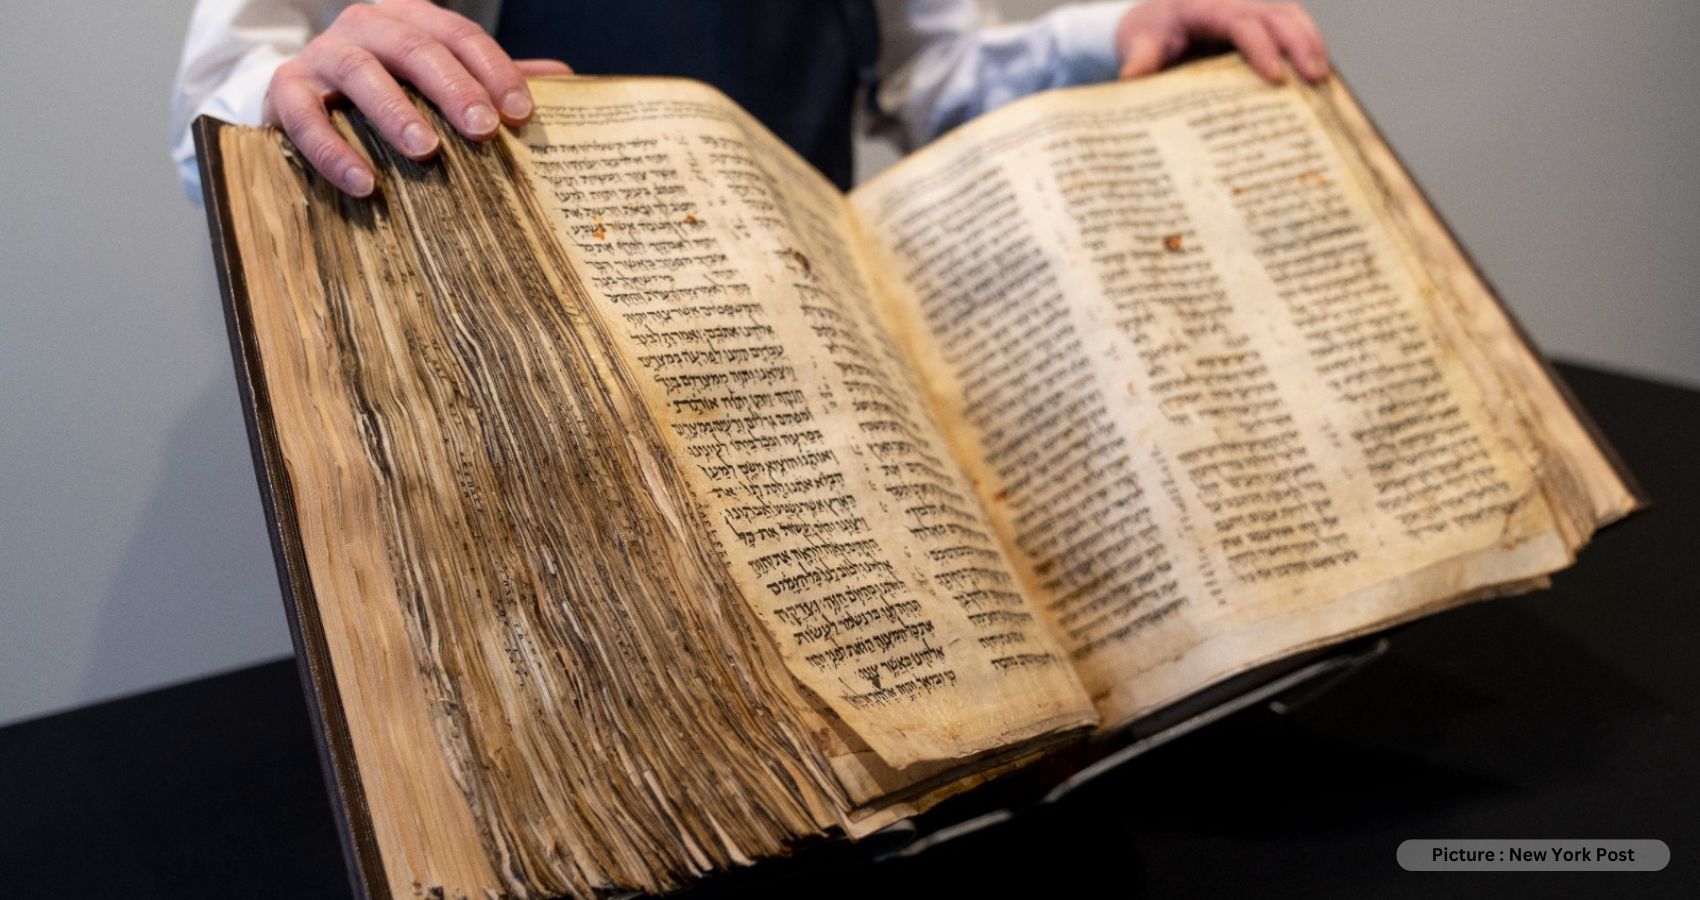 Codex Sassoon, Oldest Complete Hebrew Bible, Sells for Record $38.1m at Sotheby’s New York Auction